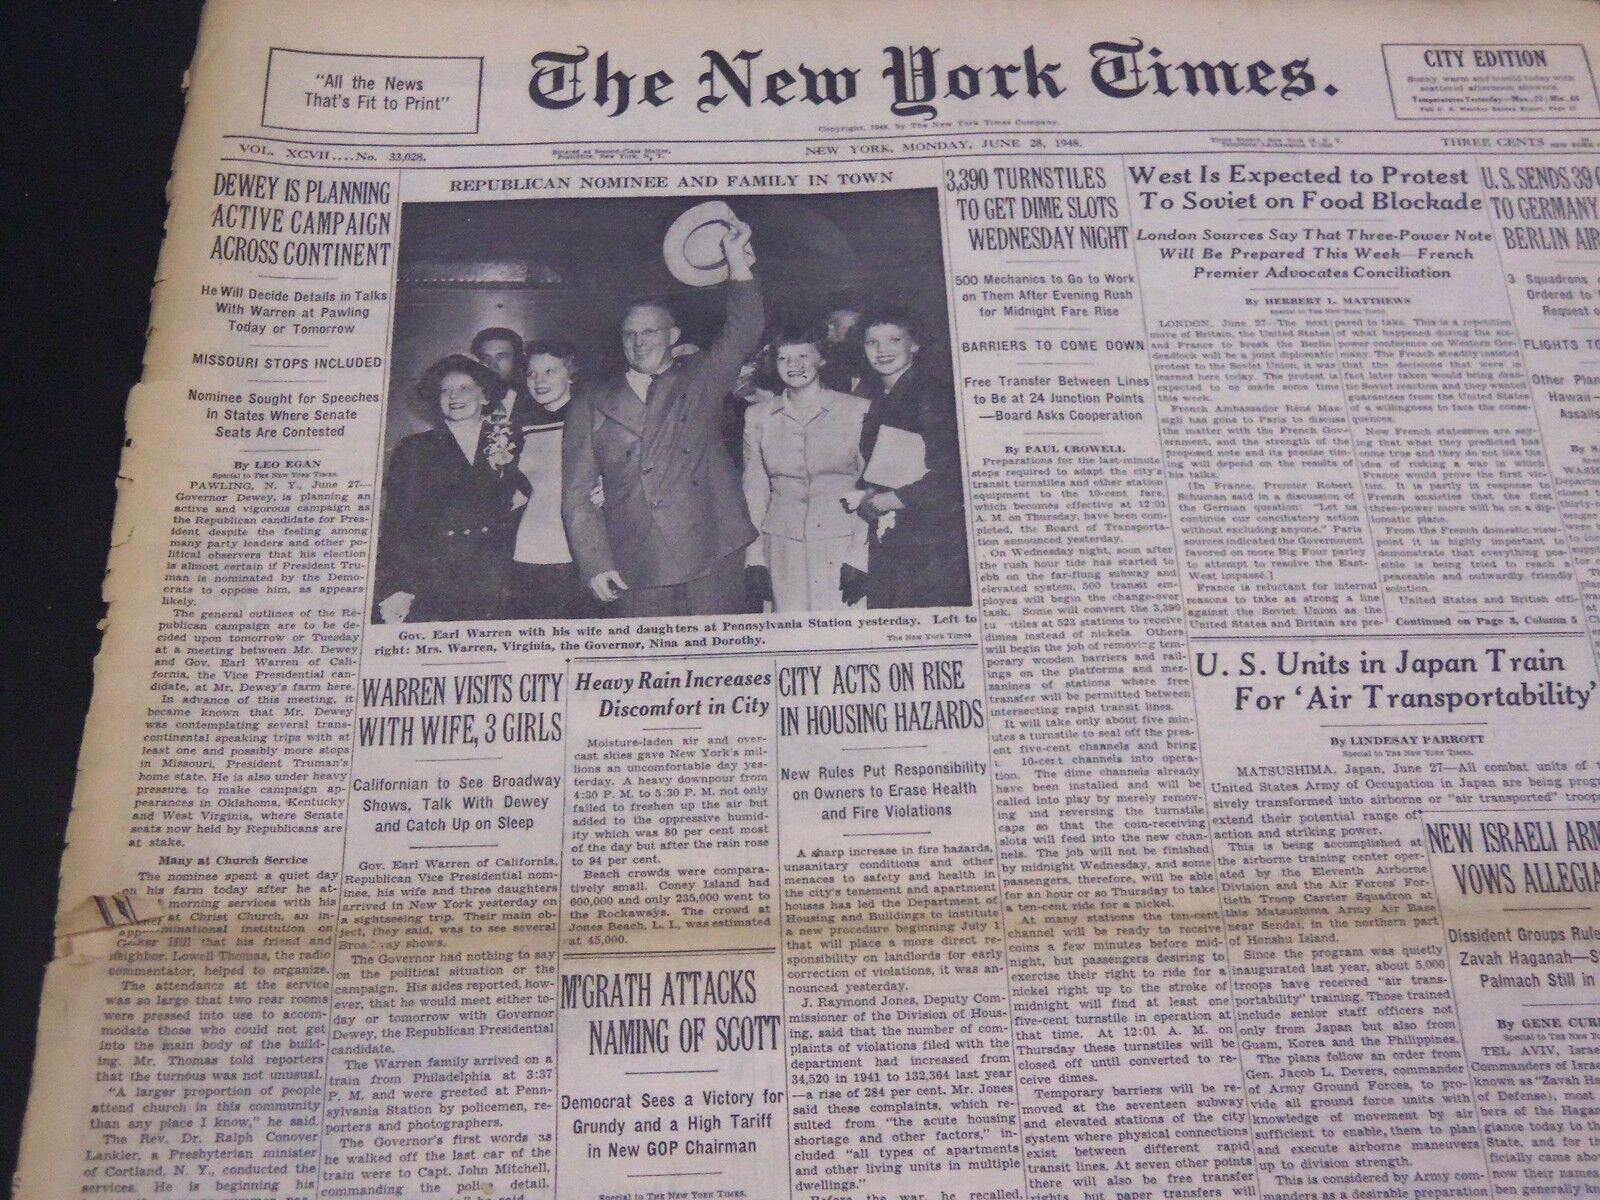 1948 JUNE 28 NEW YORK TIMES - WARREN VISITS CITY WITH WIFE - NT 4404